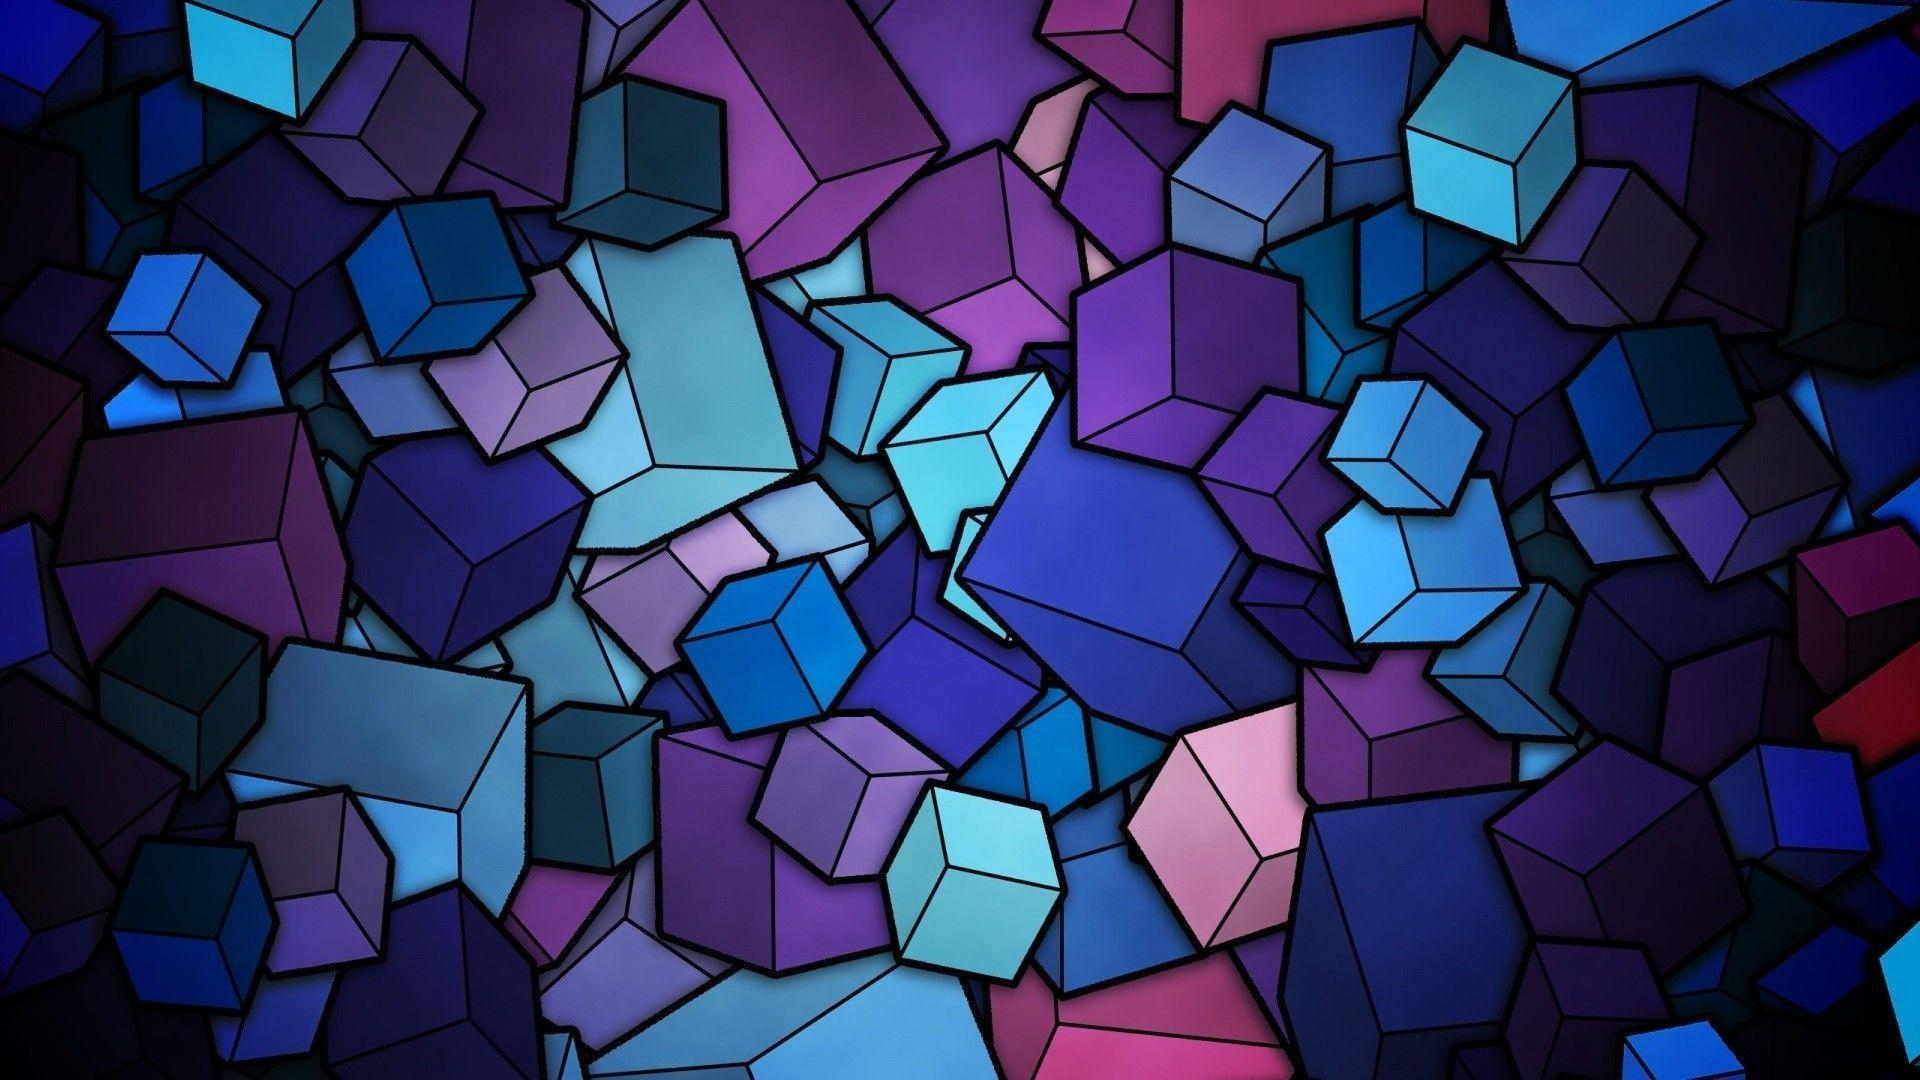 Free download Cube 3D Live Wallpaper Android Apps and Tests AndroidPIT  [1440x900] for your Desktop, Mobile & Tablet | Explore 44+ Photo Cube Live  Wallpaper | Ice Cube Wallpaper, Metatron's Cube Wallpaper, Cube Wallpapers